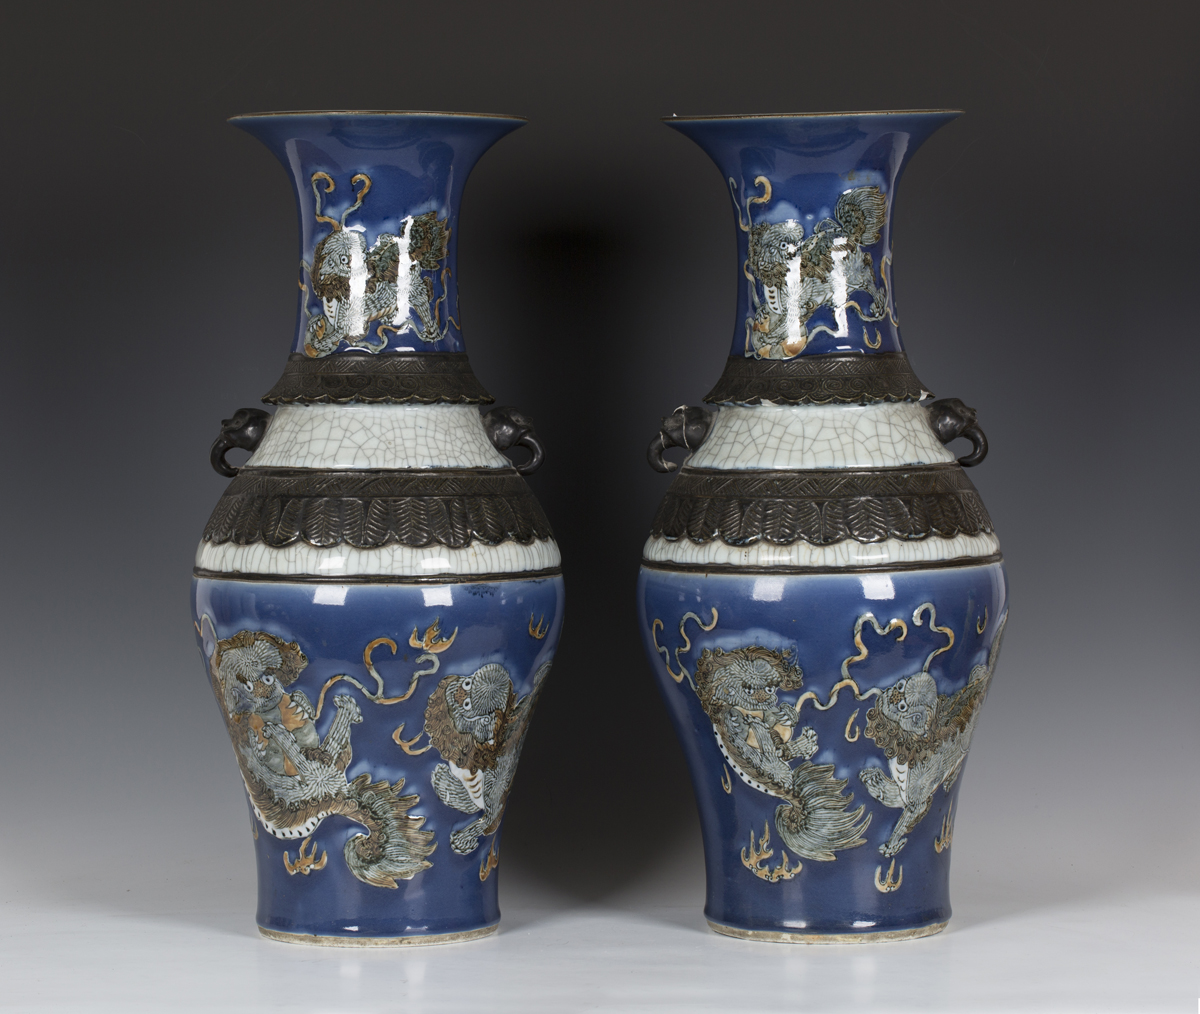 An impressive pair of Chinese blue and crackle glazed porcelain vases, late Qing dynasty, each of